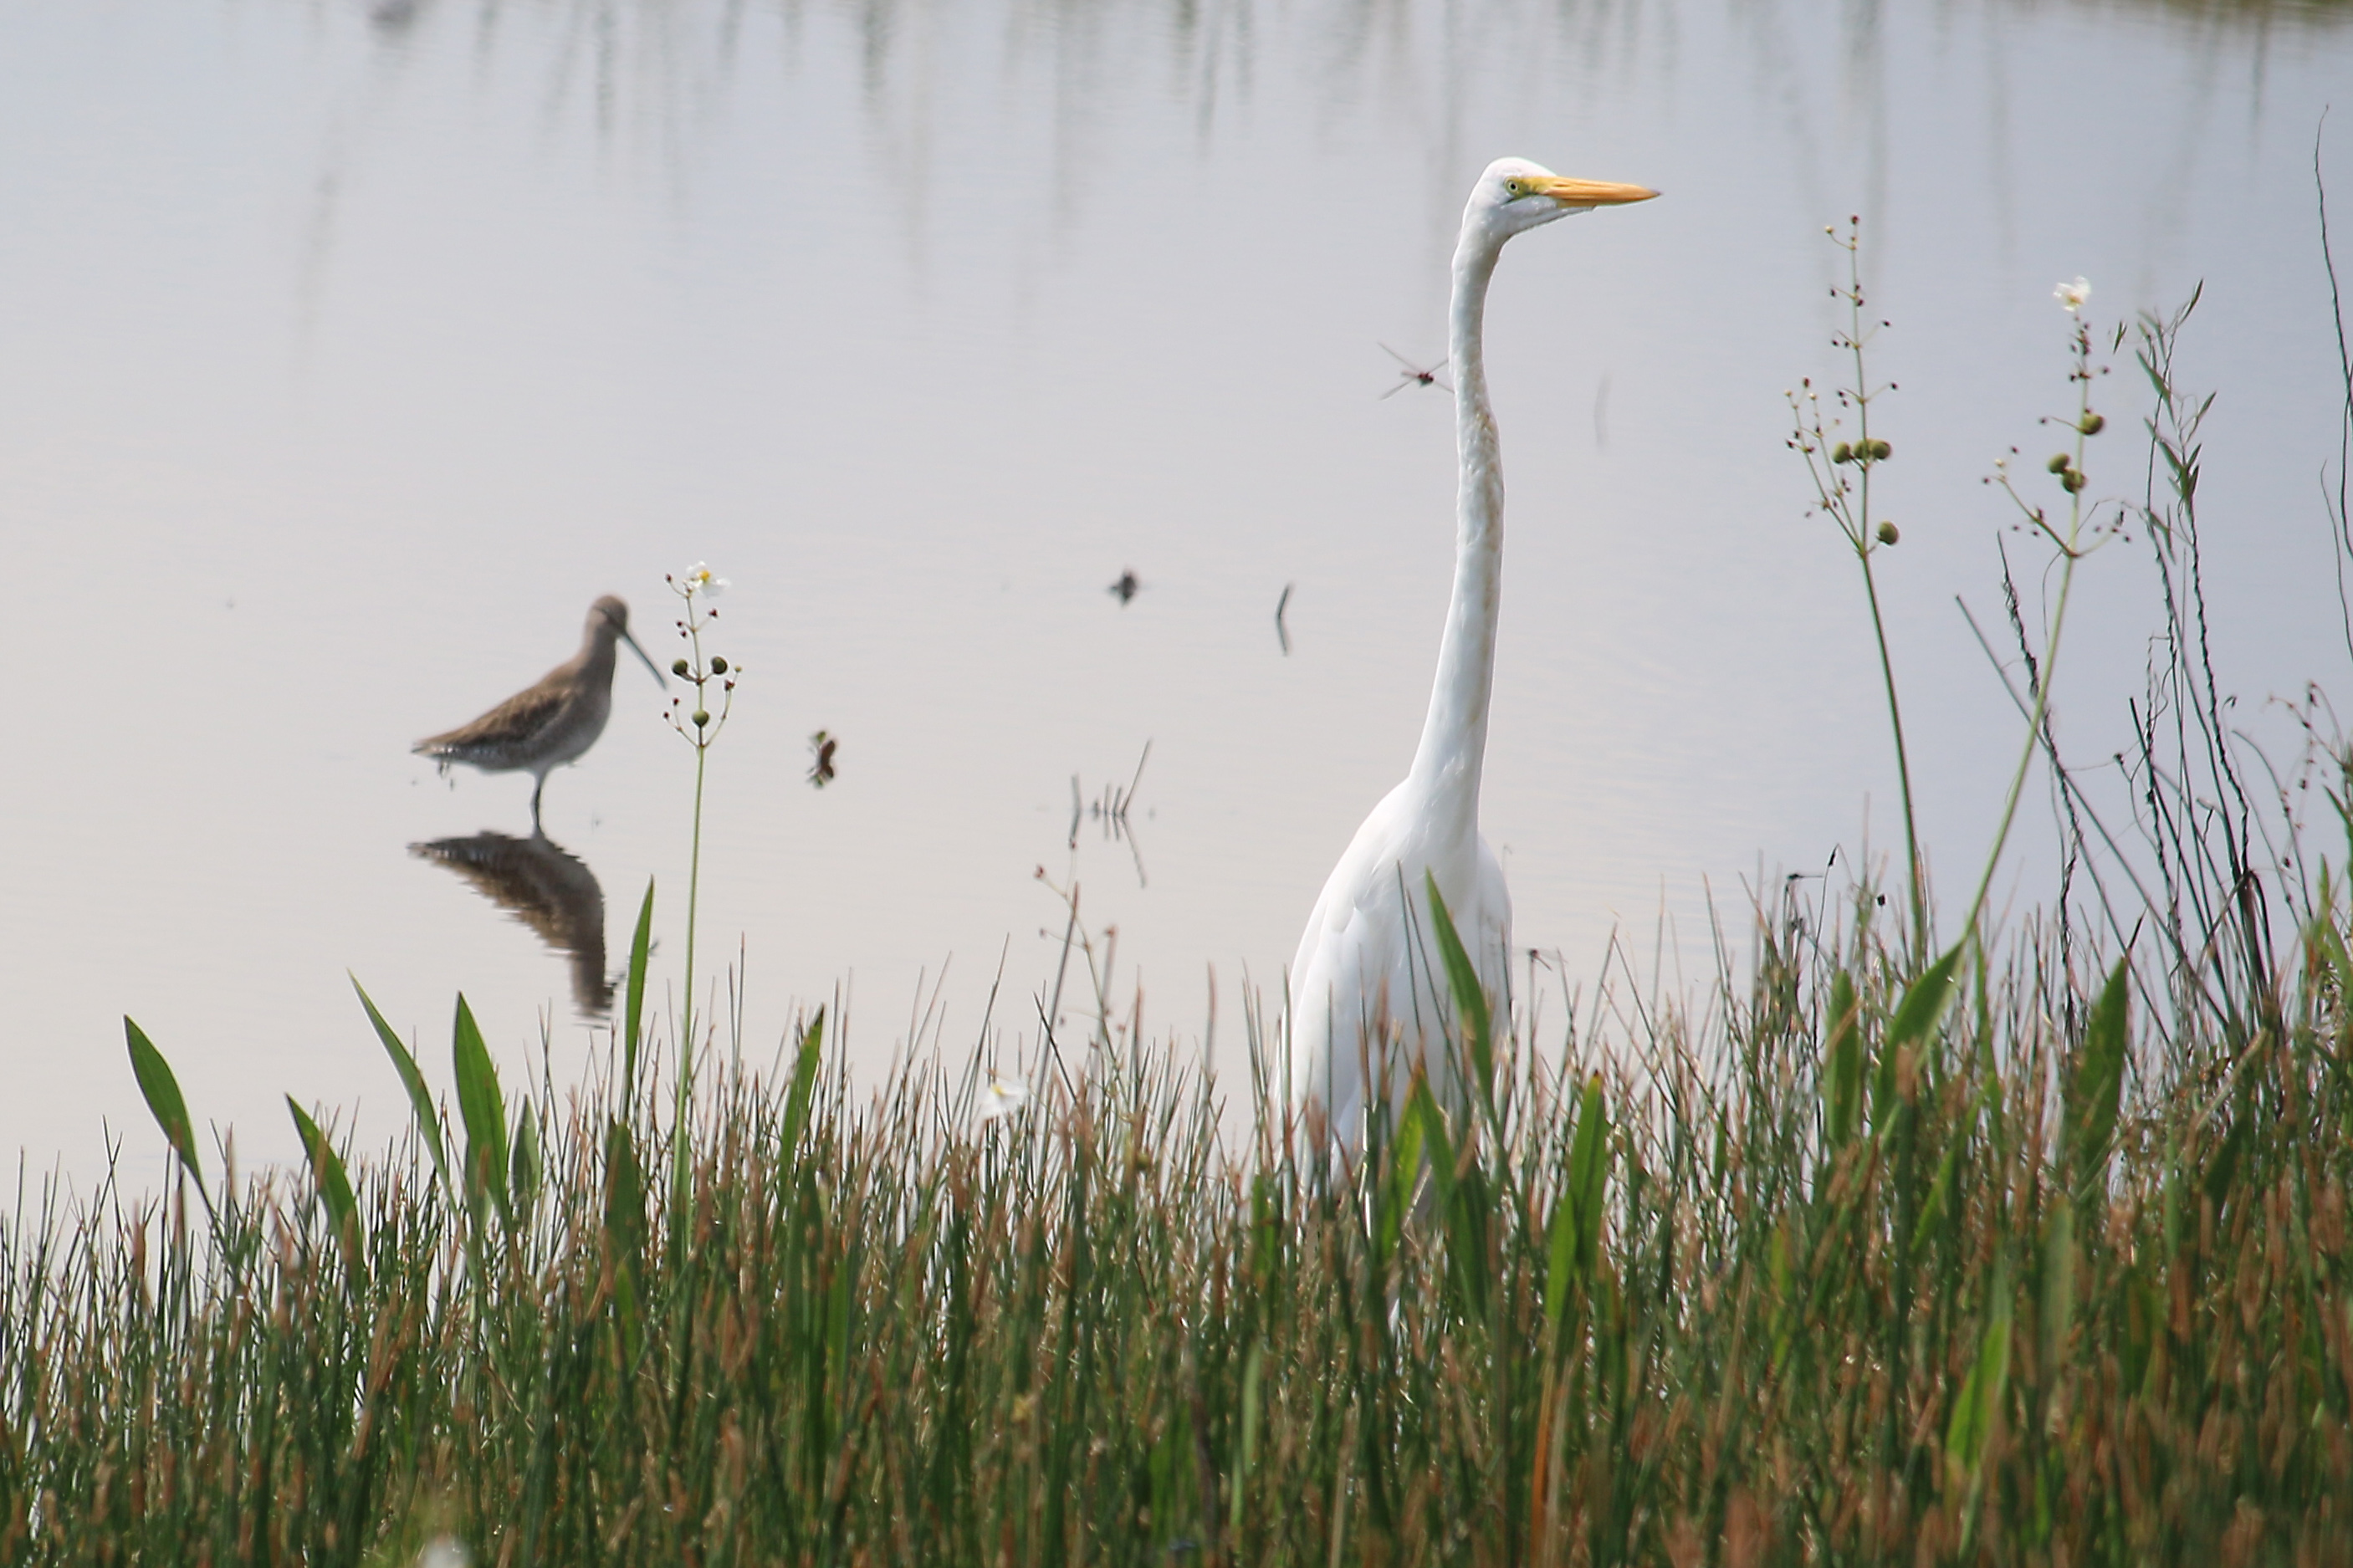 Long-billed Dowitcher and Great Egret